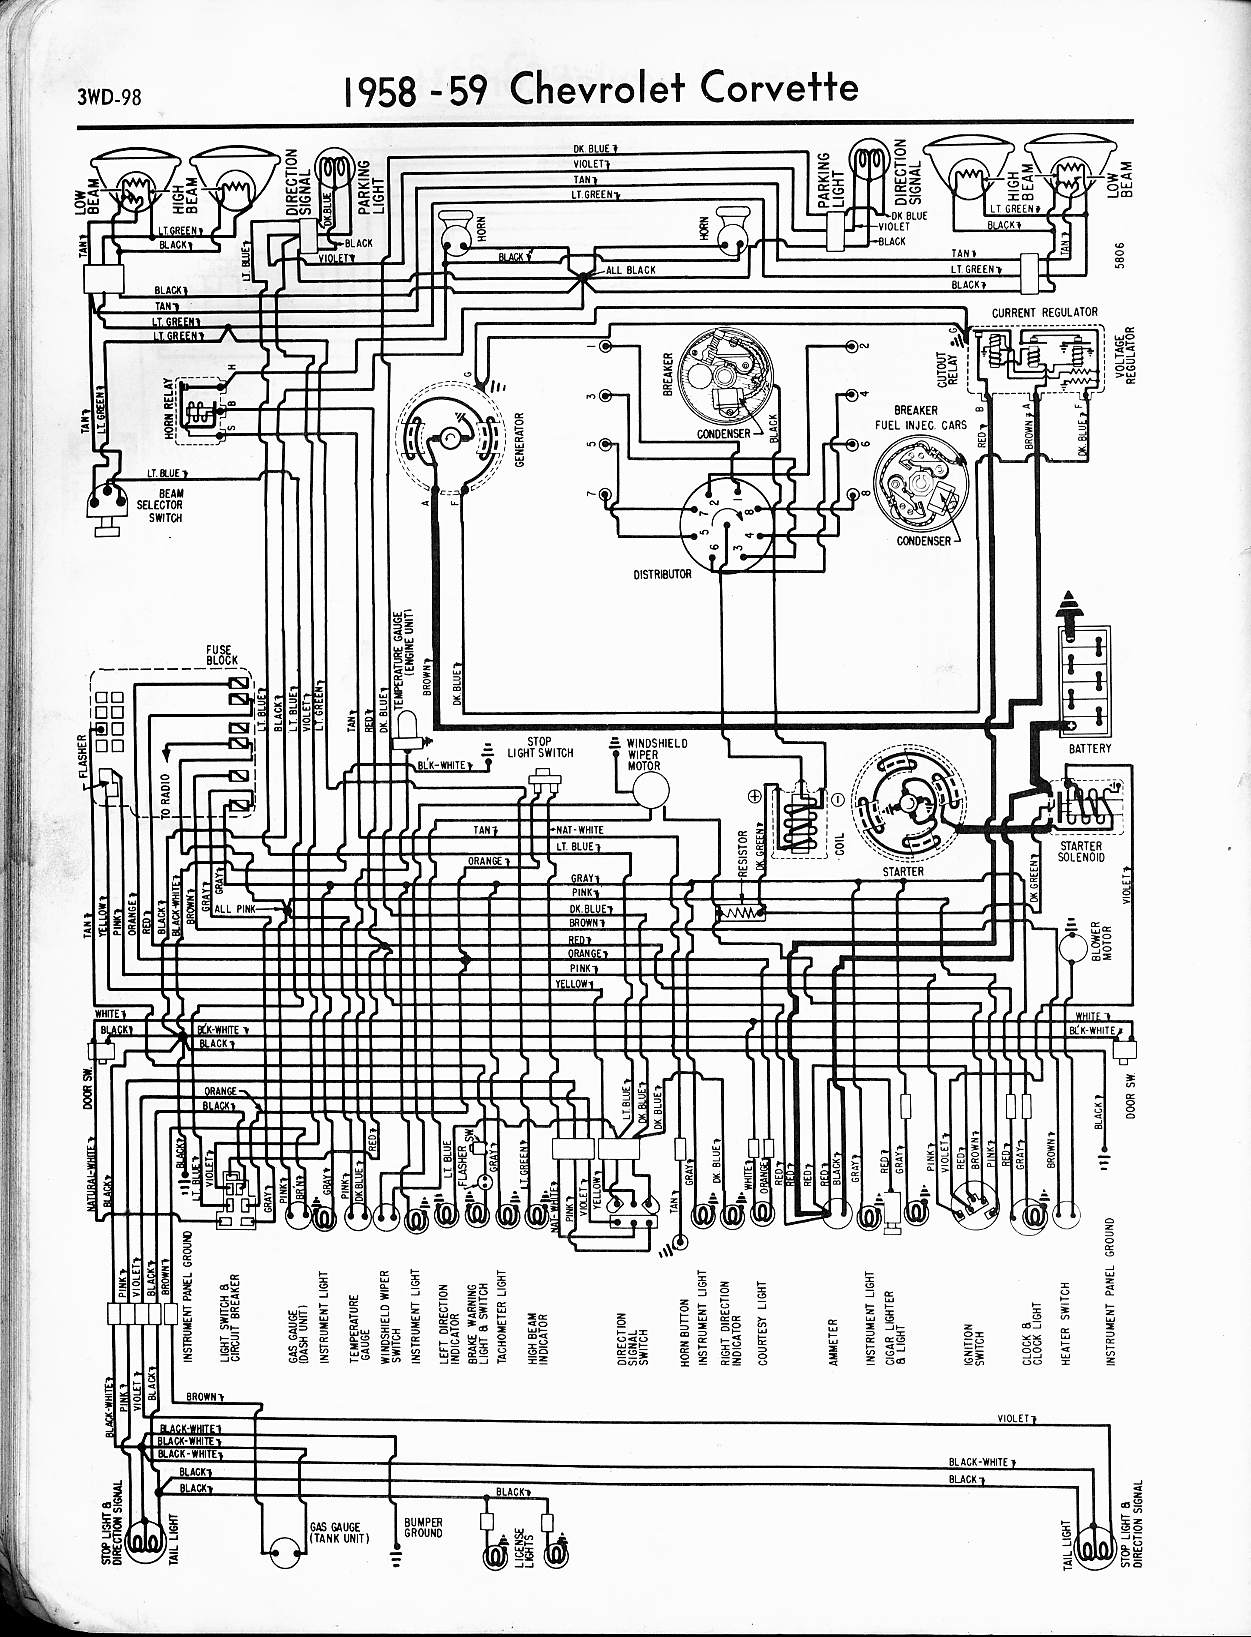 1960 Chevy Chevrolet 4 Wire Voltage Regulator Wiring Diagram from www.oldcarmanualproject.com